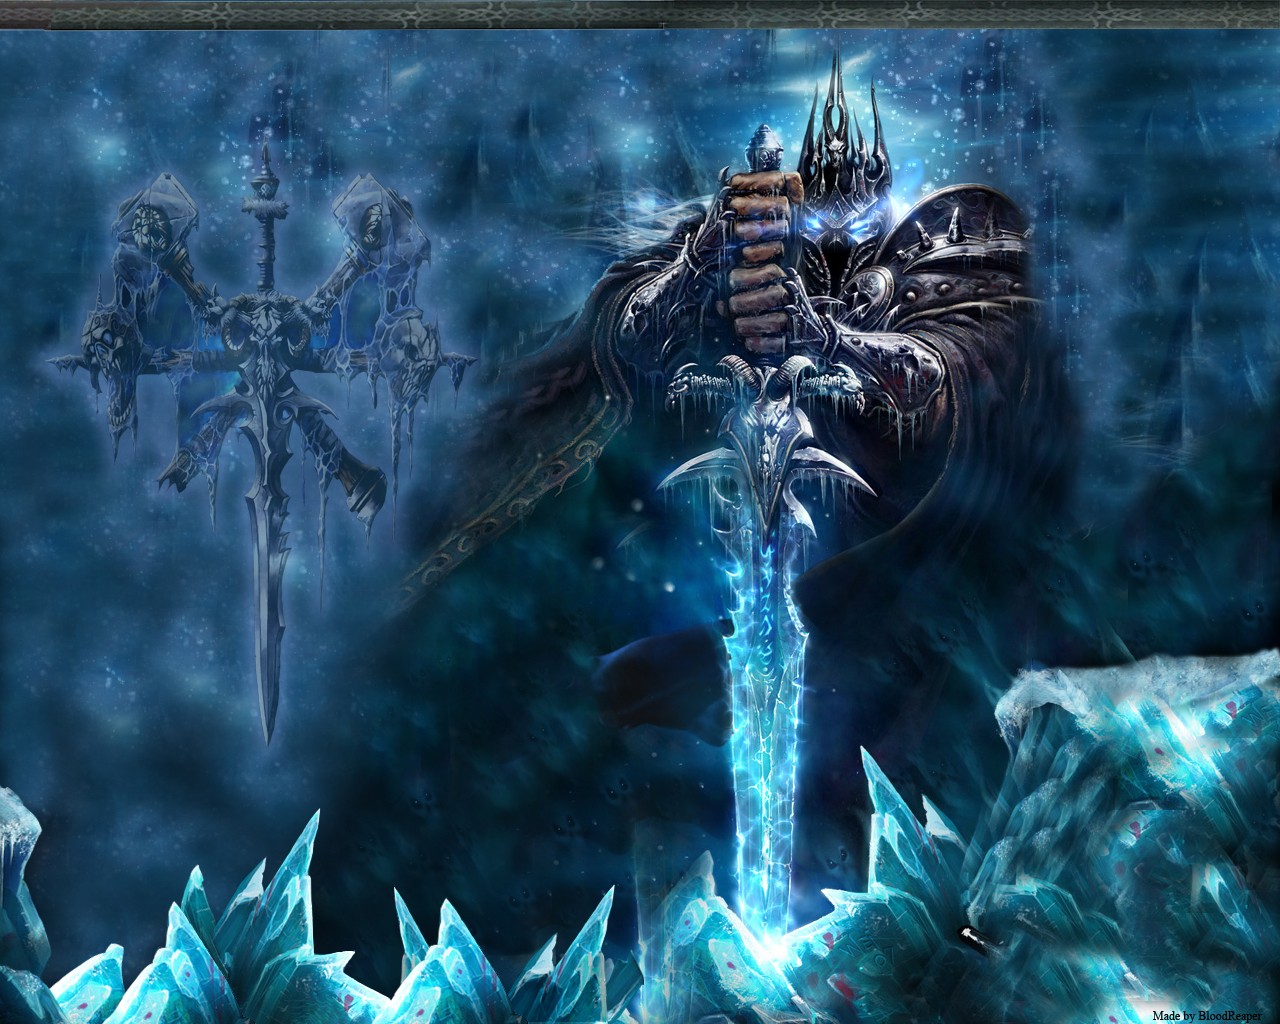 General 1280x1024 Warcraft World of Warcraft: Wrath of the Lich King World of Warcraft PC gaming fantasy art Blizzard Entertainment sword weapon ice fantasy armor glowing eyes blue eyes video game art